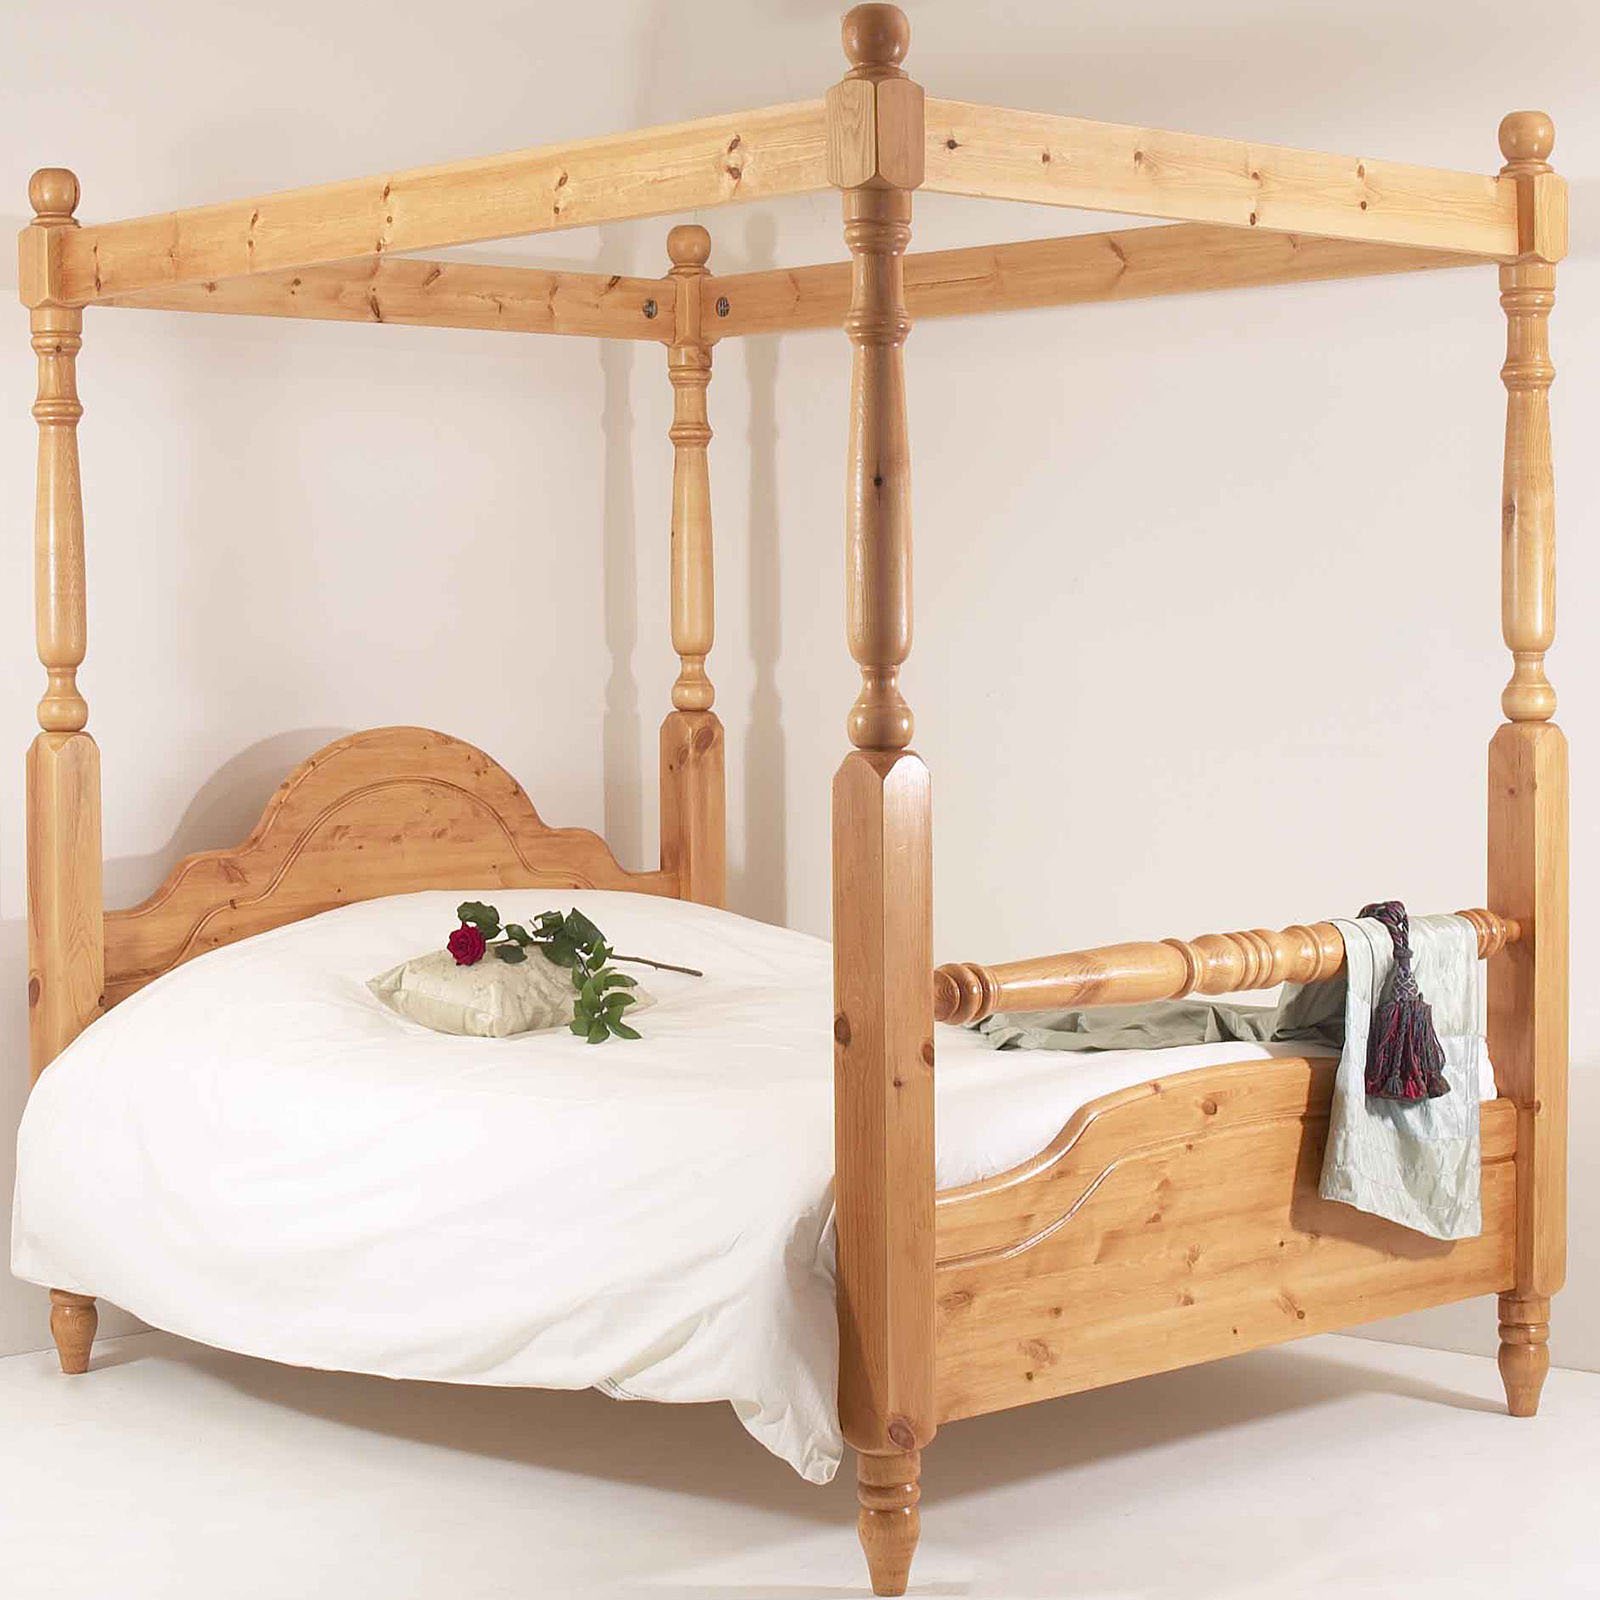 5ft Classic Rail Four Poster Bed King, King Size 4 Poster Bed